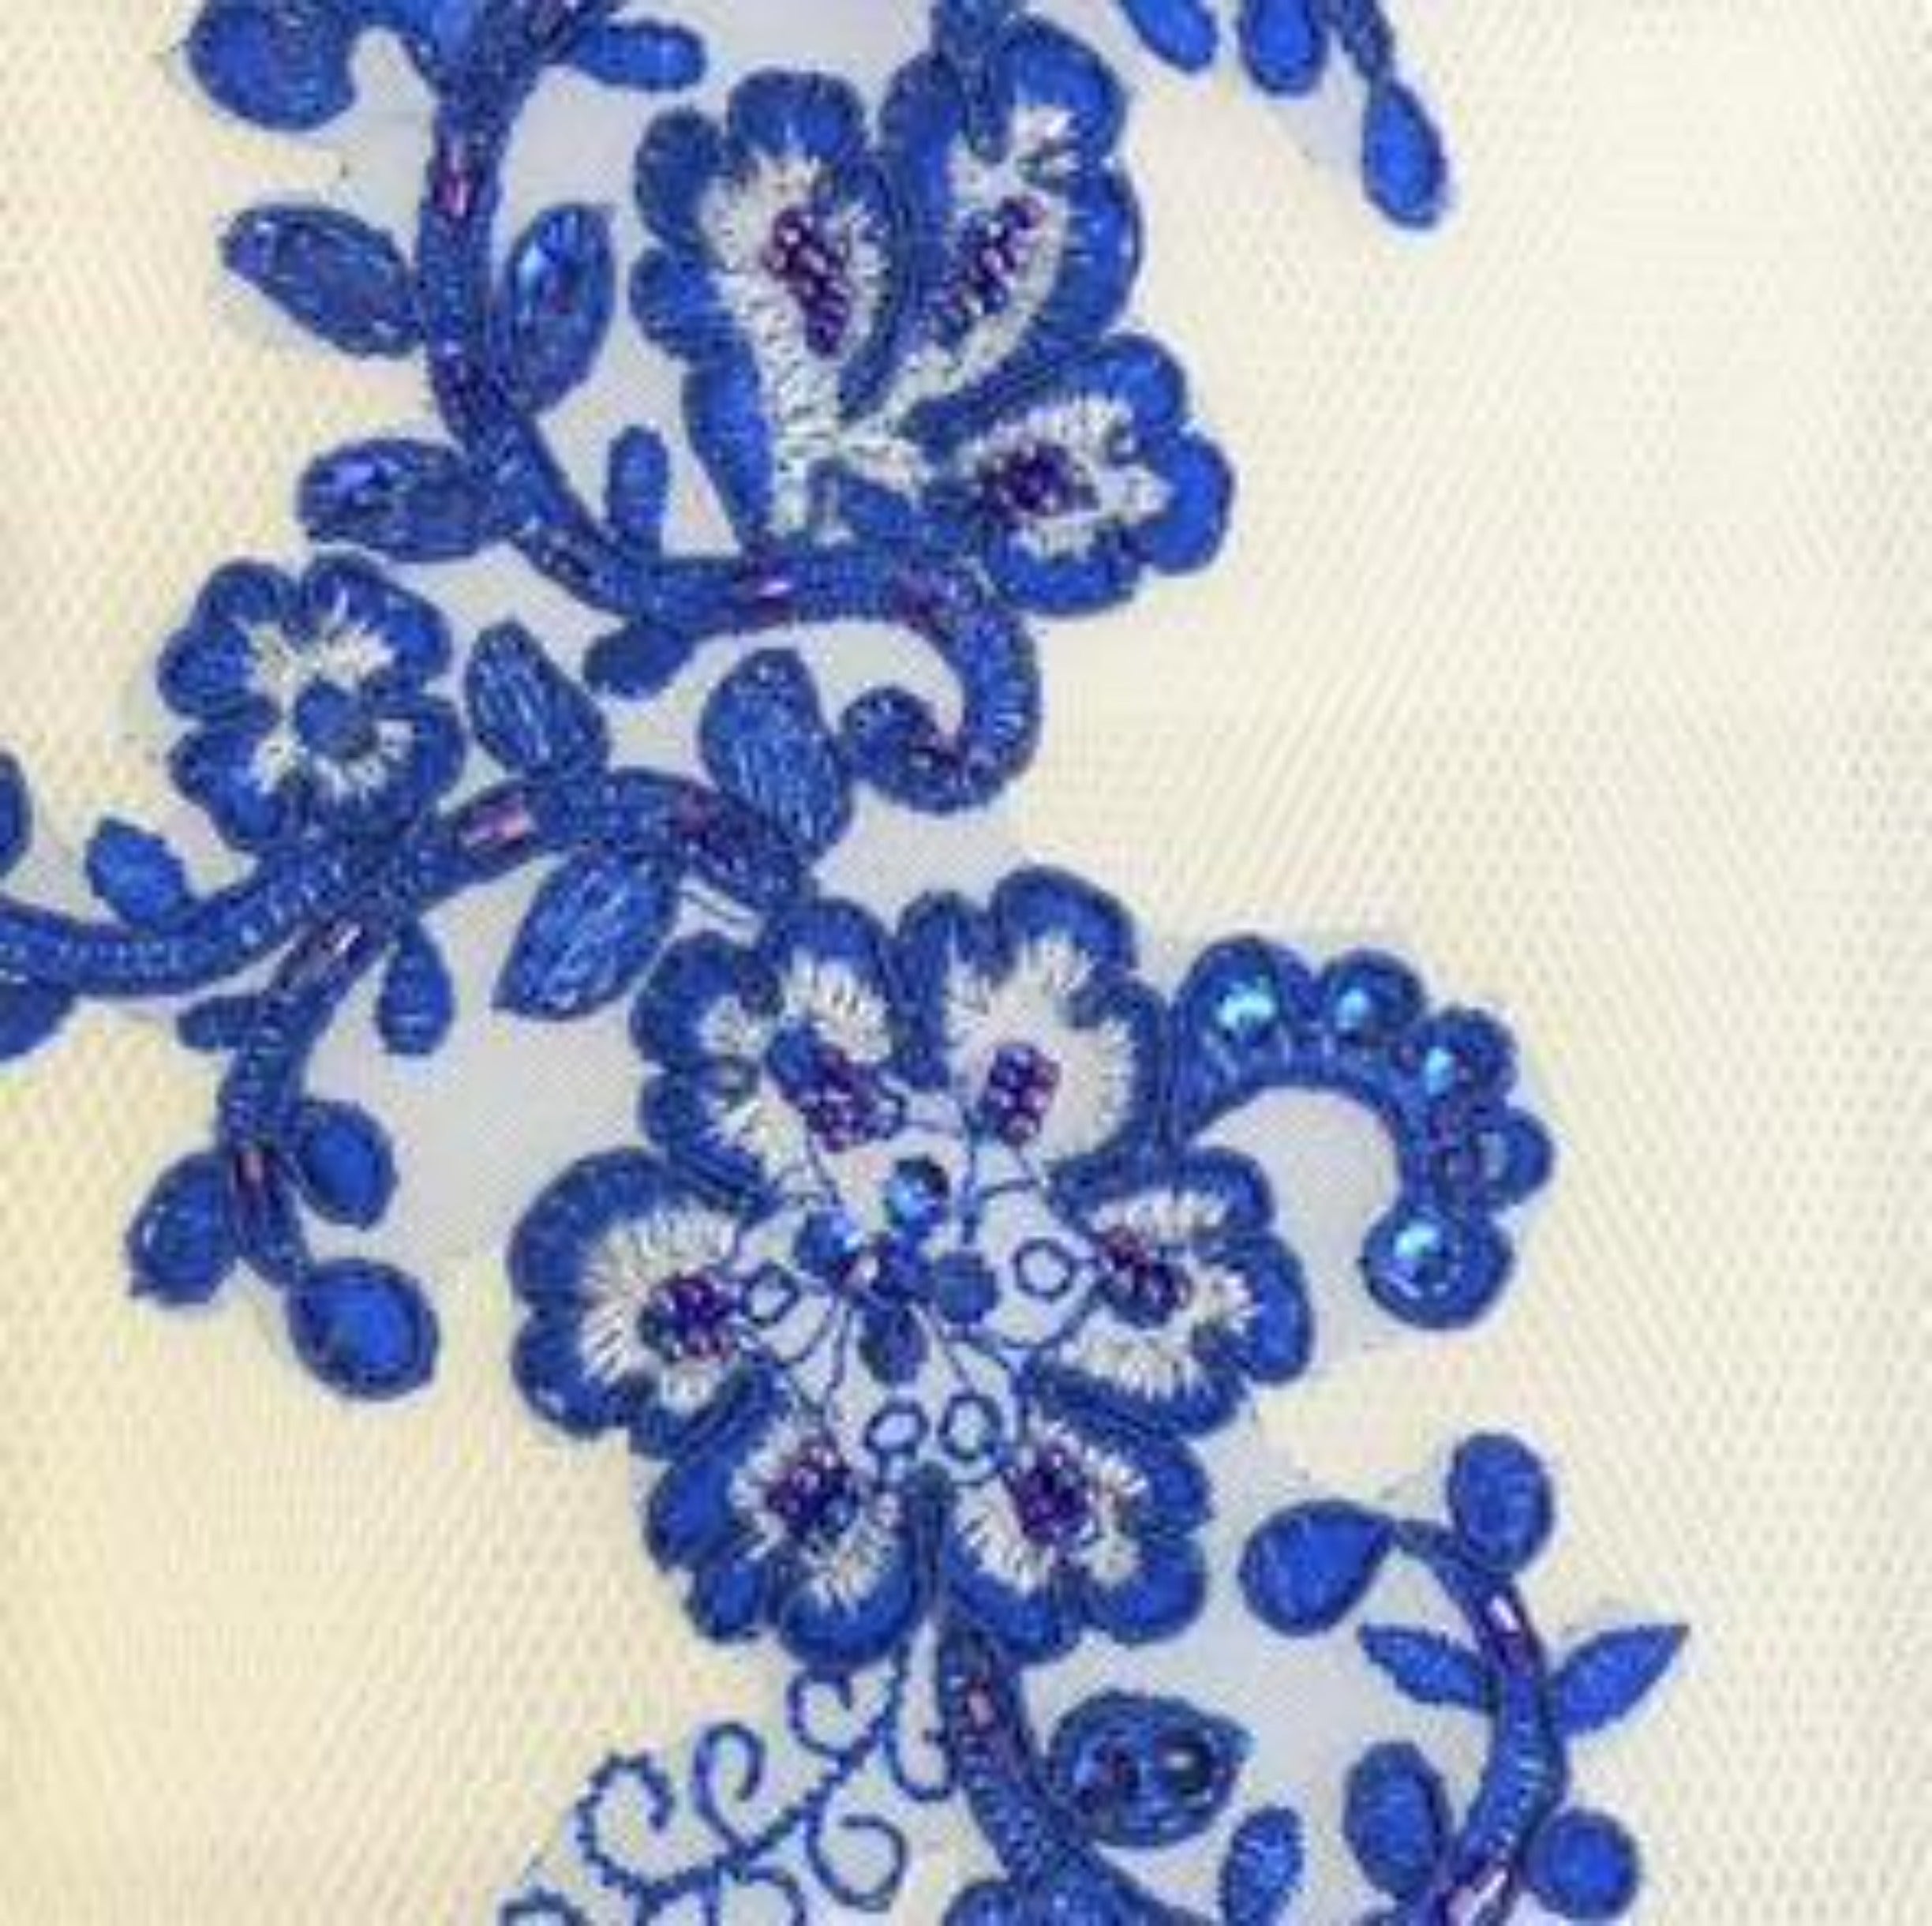 Gorgeous royal blue lace applique embroidered onto a fine net backing and embellished with beads. The flower motifs are embroidered with white thread and edged with royal blue thread around each petal. The petals are further embellished with seed beads in varying shades of blue and purple. Blue sequins edge the leaf shapes.